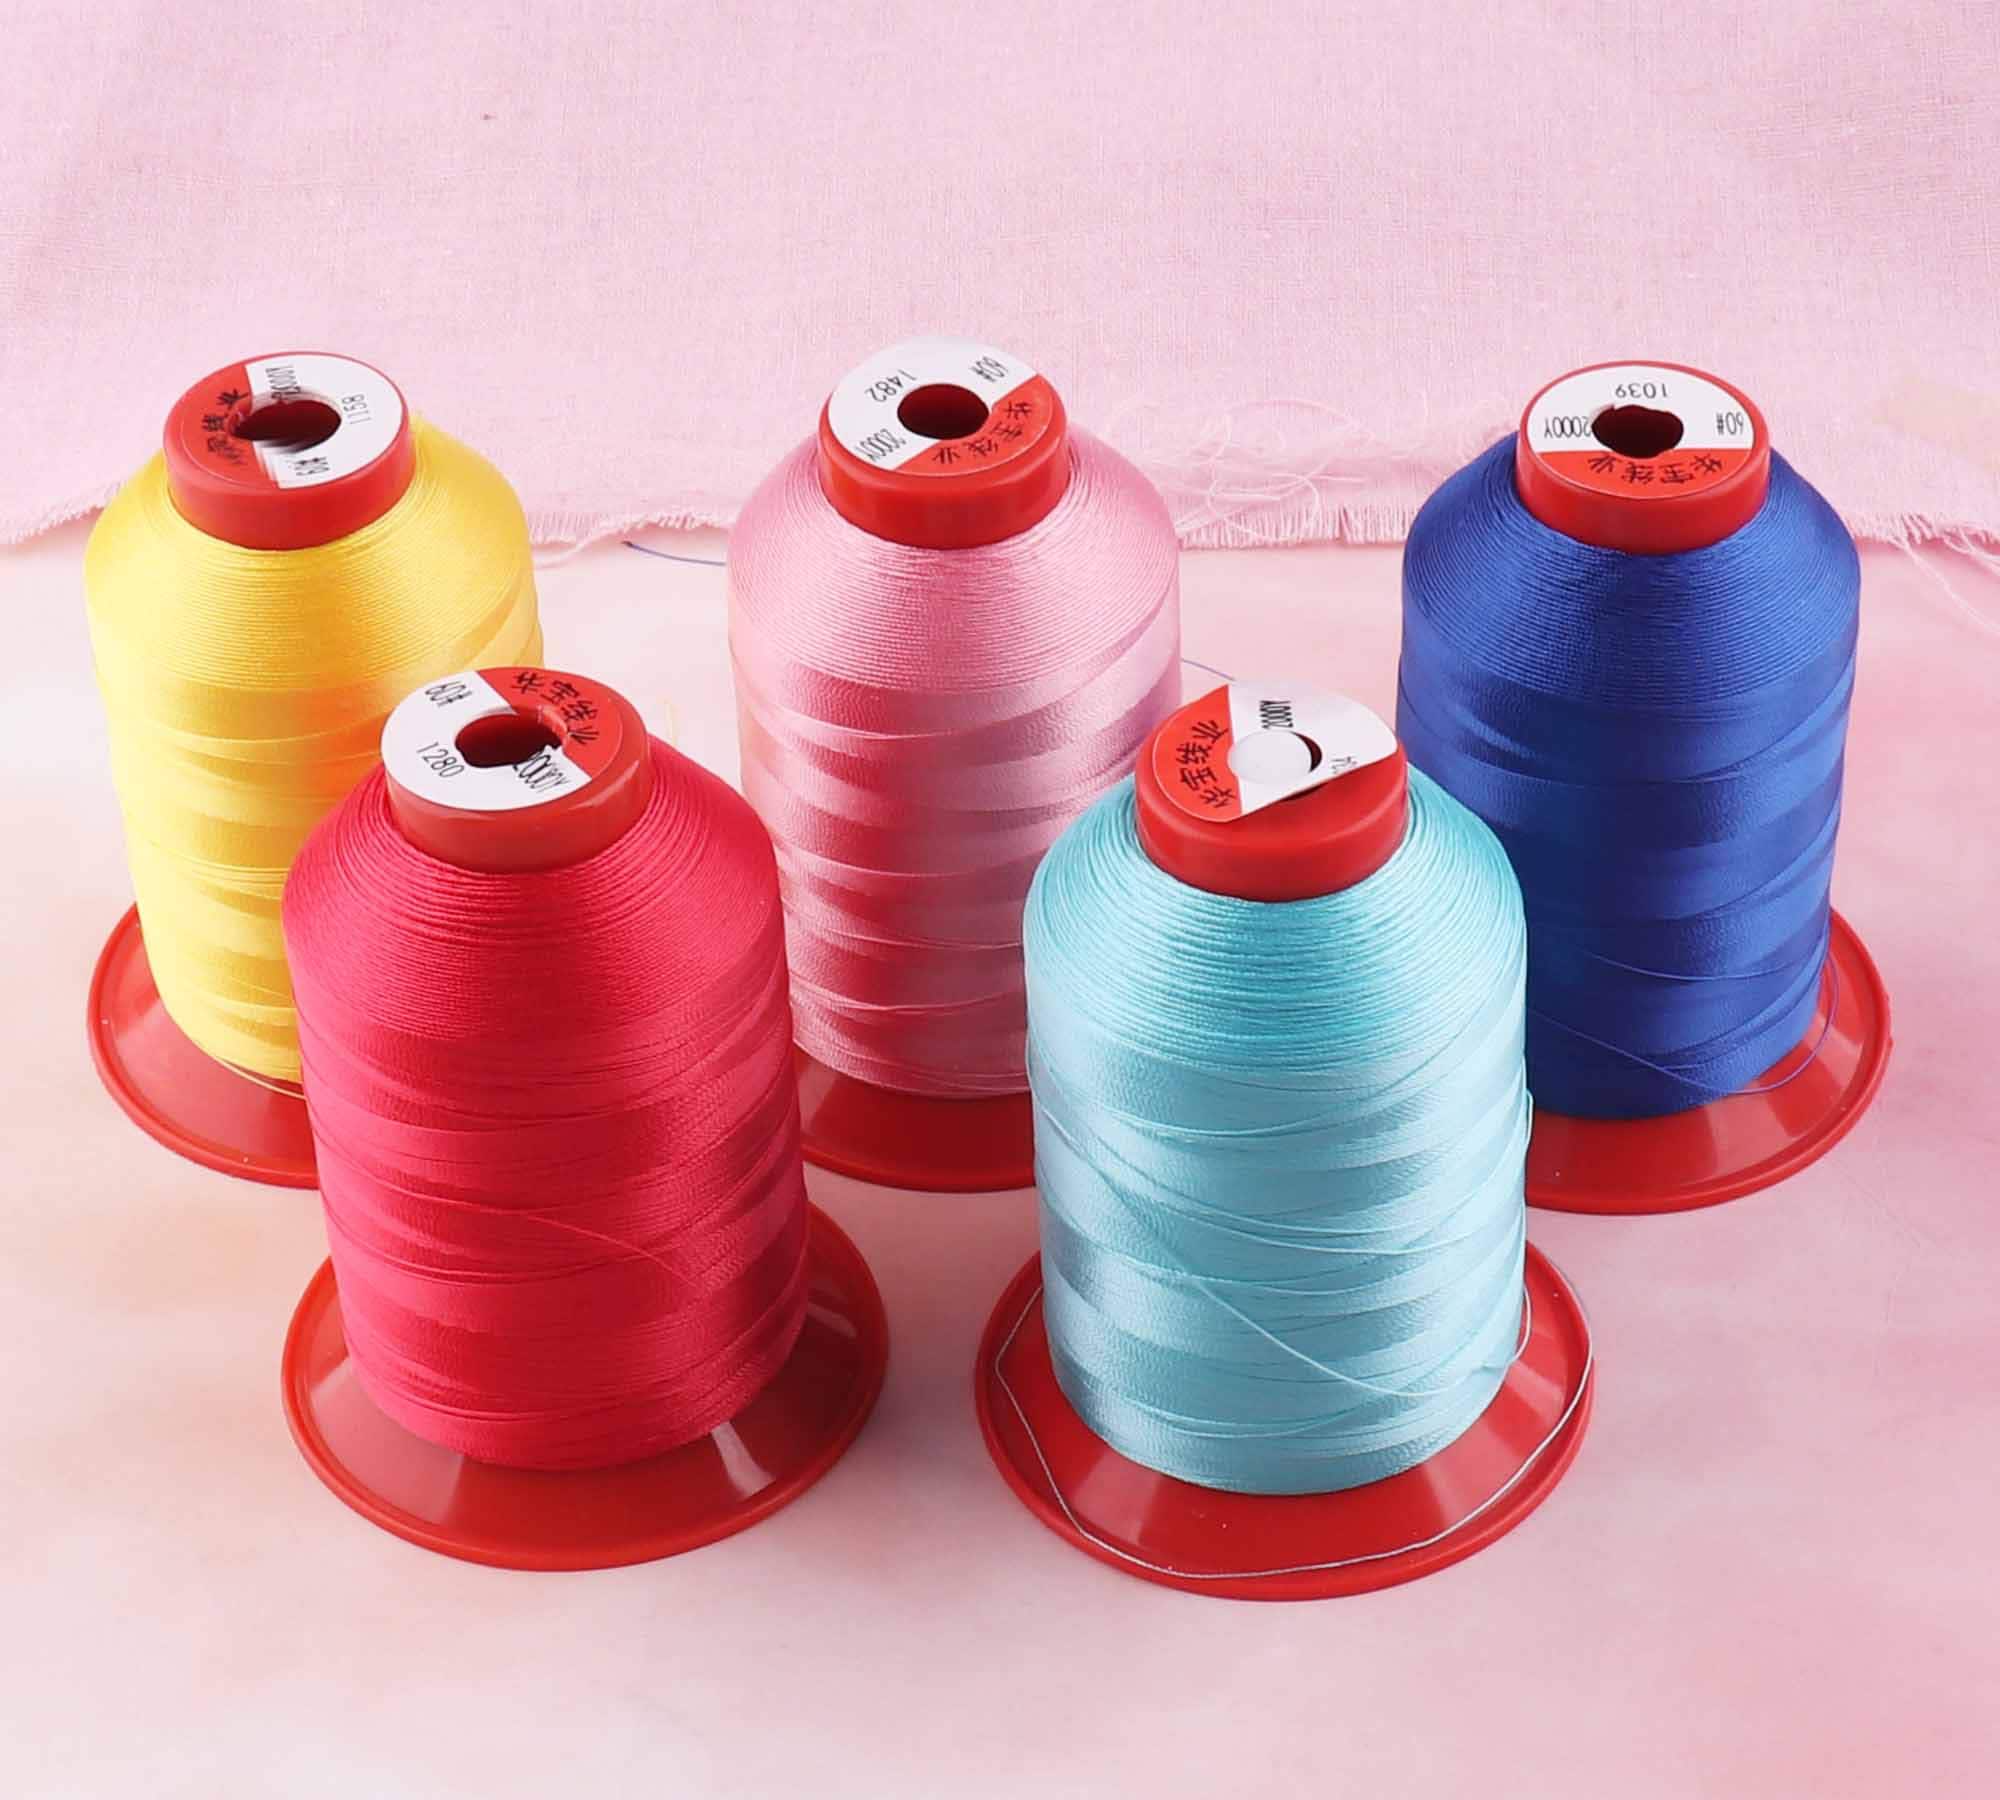 Super Soft Plush Thread Polyester Mousse Thread Great for Overlocking on  Underwear/lingerie Black, Grey, Red 